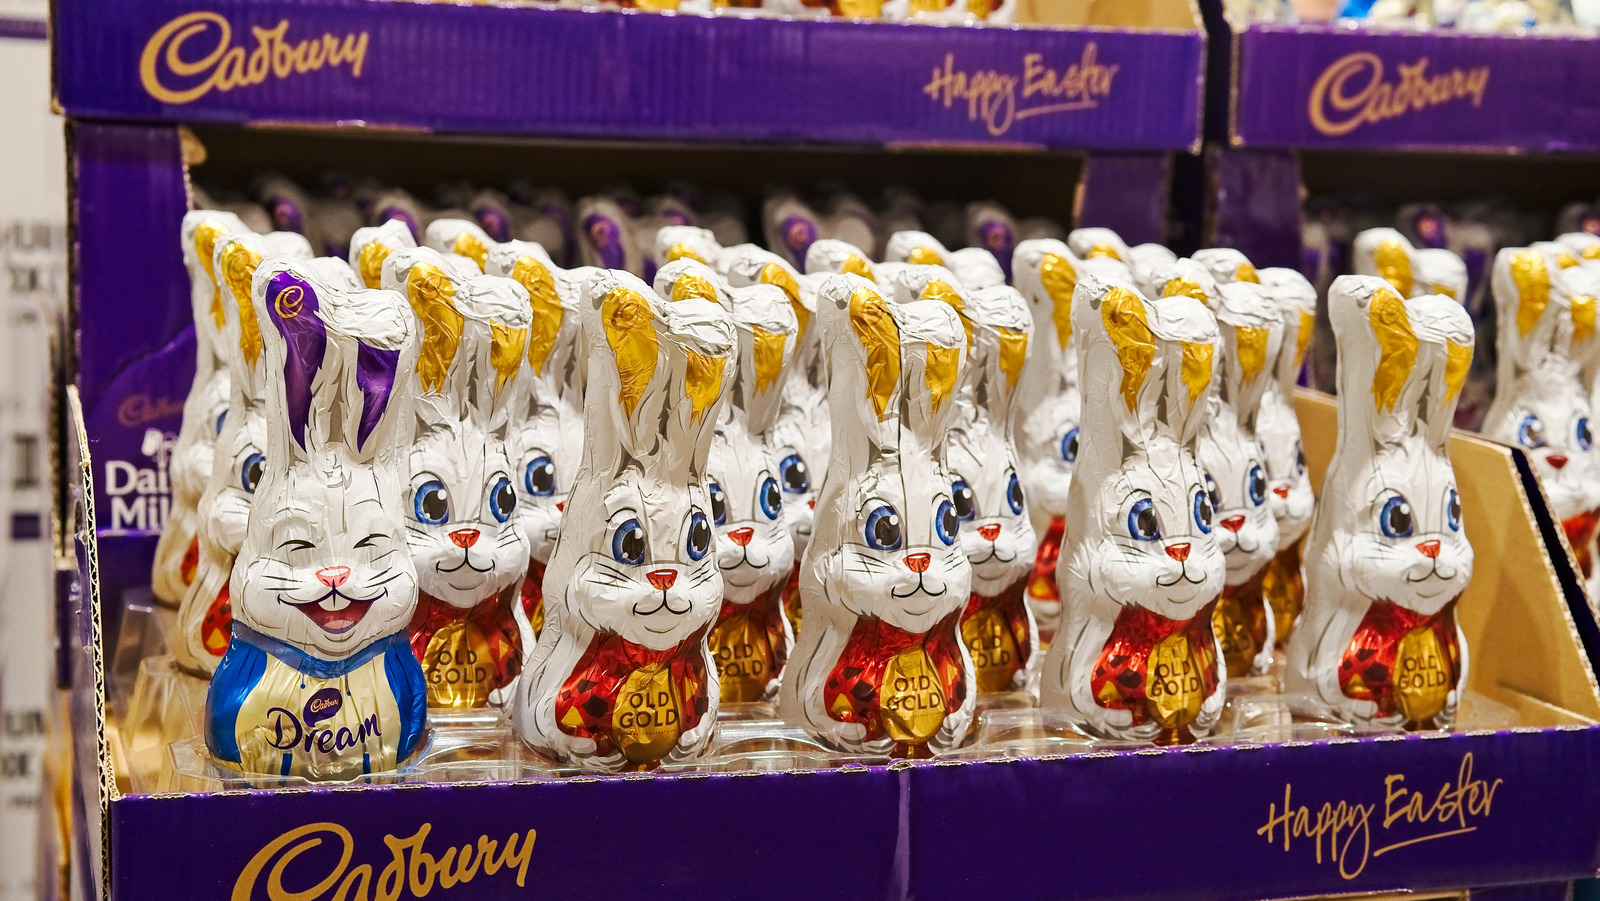 The Winner Of The Cadbury 'Bunny' Tryouts Has Officially Been Declared